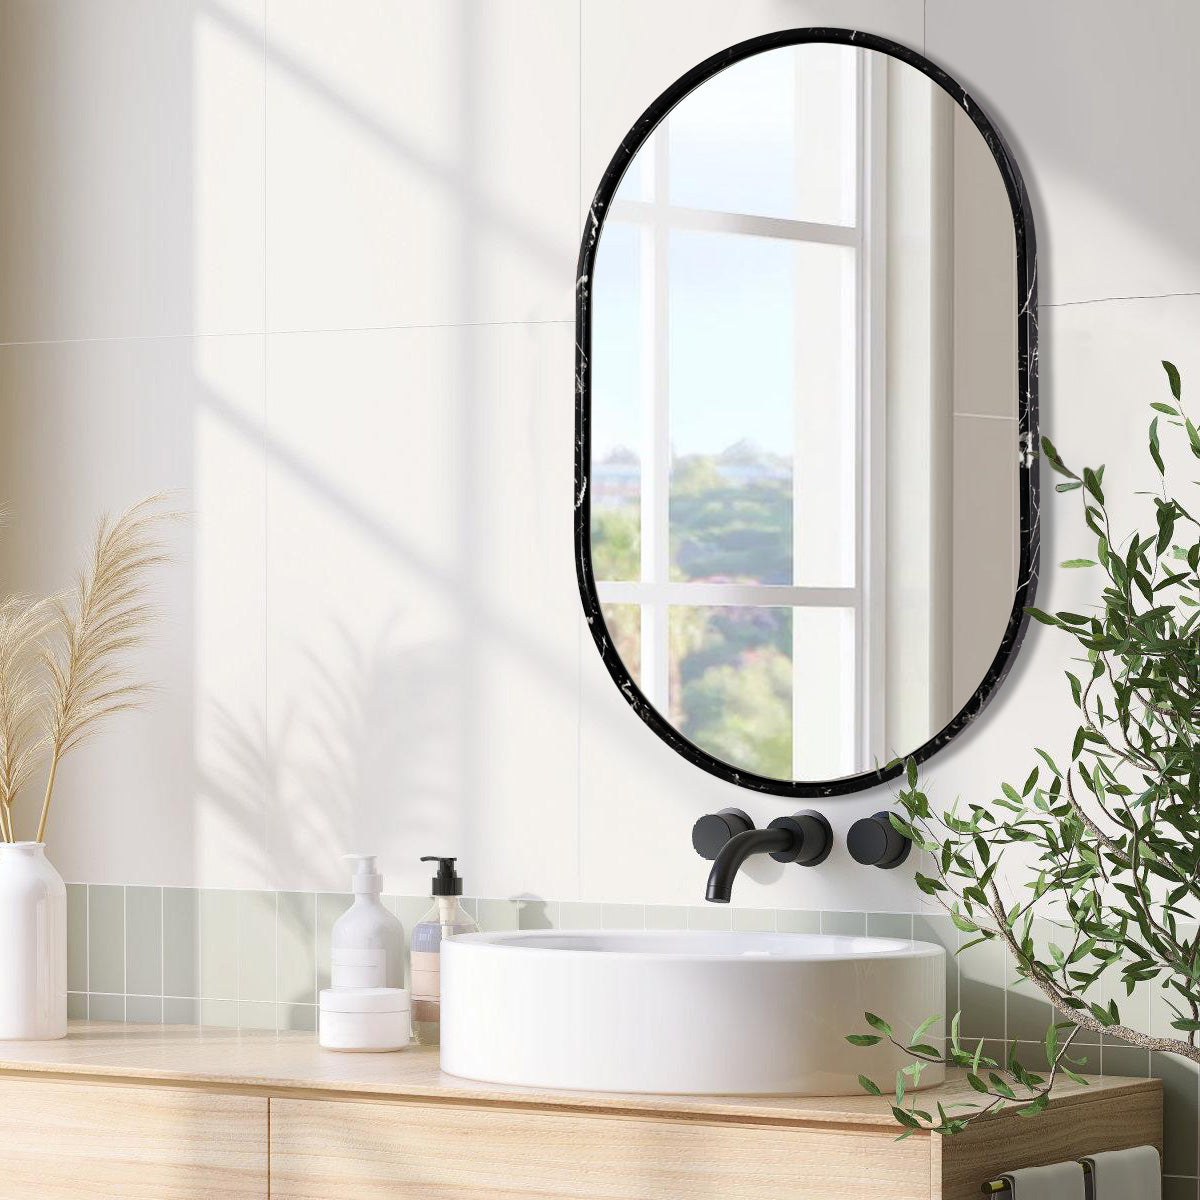 Contemporary High End Black Marble Framed Pill/ Capsule Shaped Mirrors for Vanity Bath